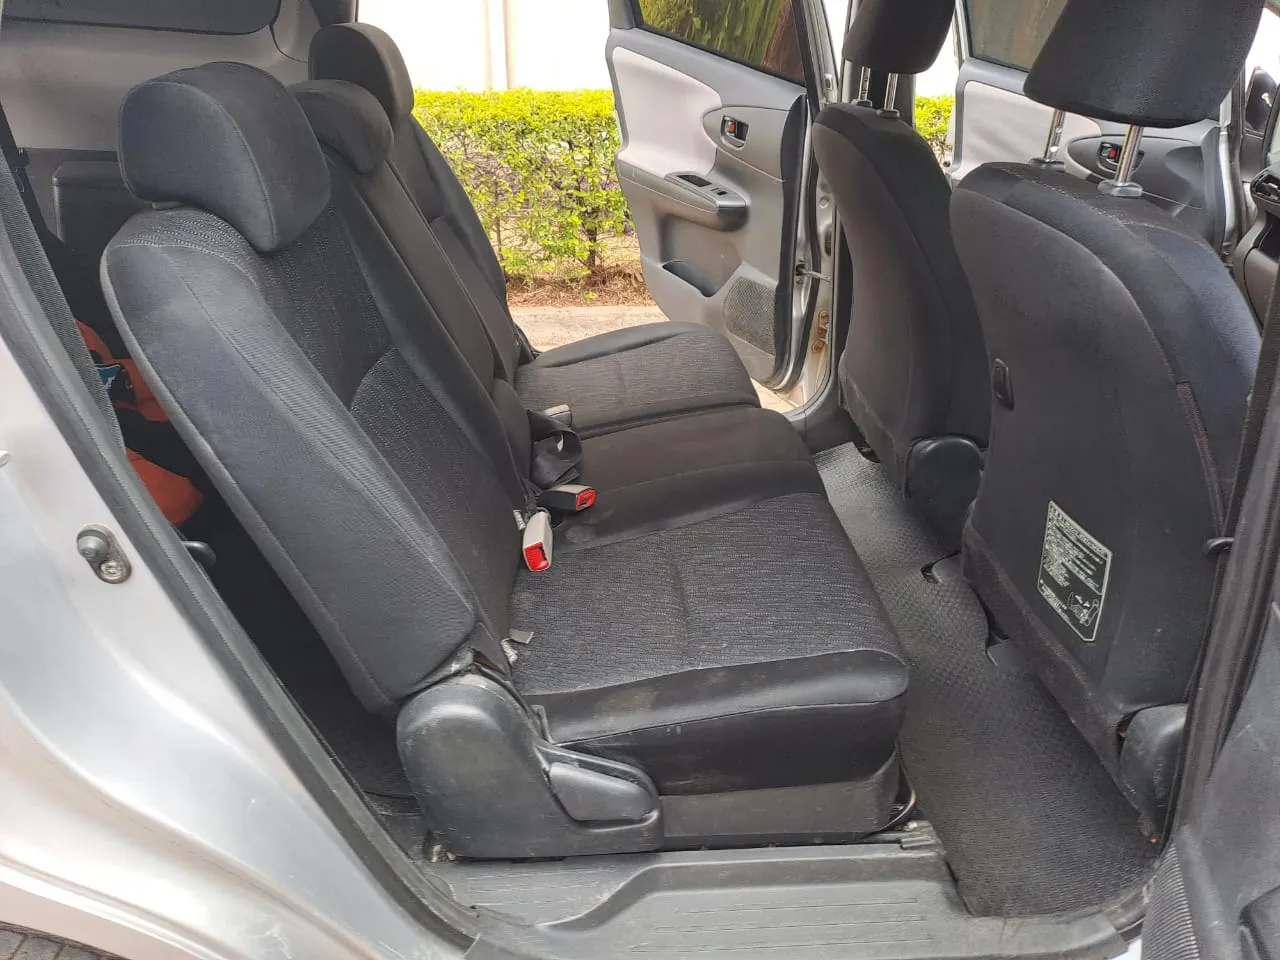 Toyota WISH for sale in Kenya QUICKEST SALE You Pay 30% Deposit Trade in OK EXCLUSIVE Hire Purchase Installments bank finance 🔥🔥